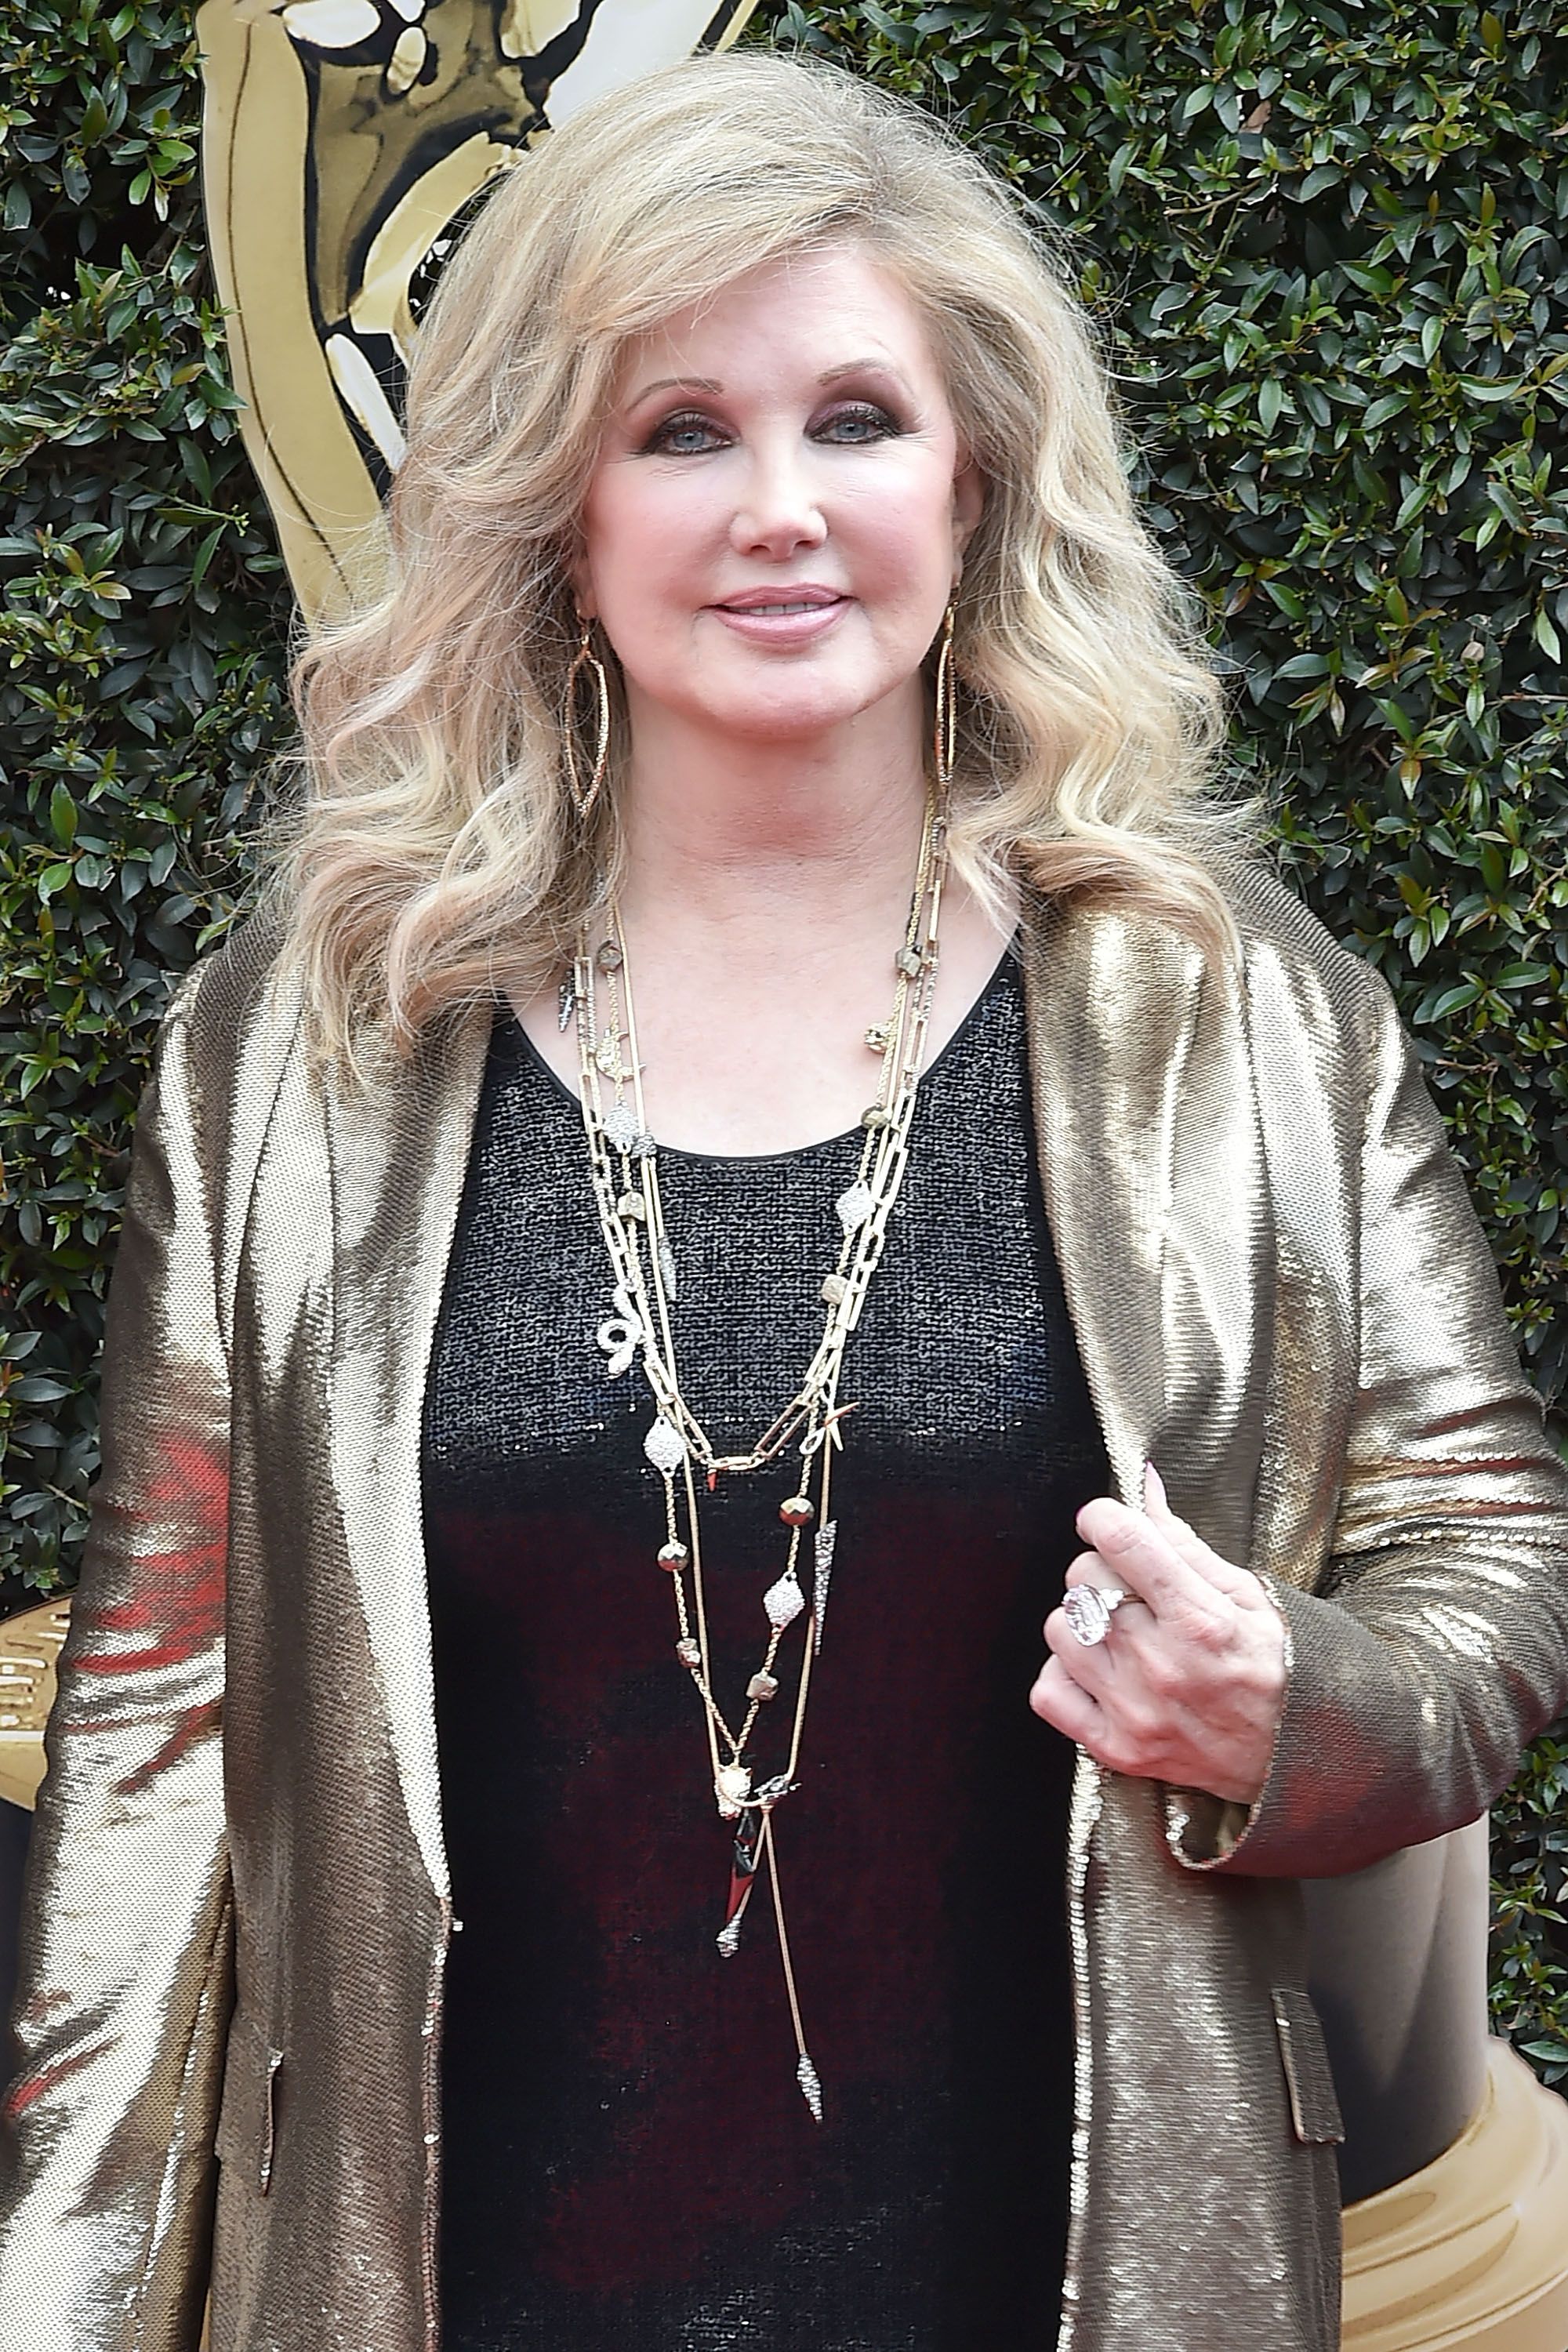 Morgan Fairchild attends the 2018 Daytime Emmy Awards Arrivals at Pasadena Civic Auditorium on April 29, 2018 in Pasadena, California. | Source: Getty Images